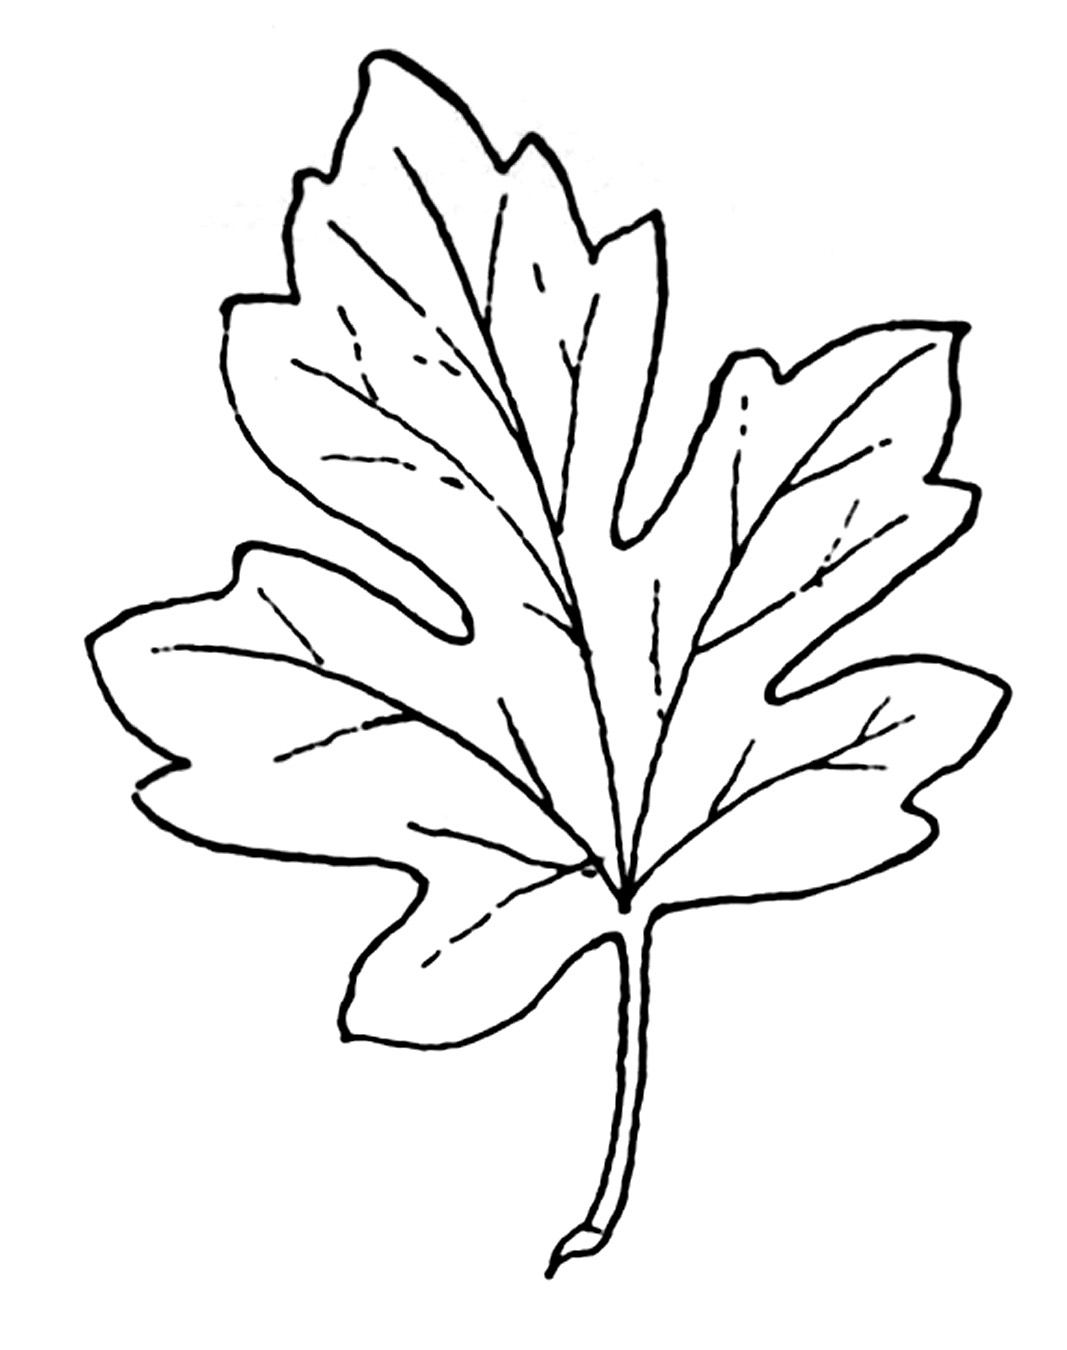 Leaf  black and white black and white leaf clipart clipartfest